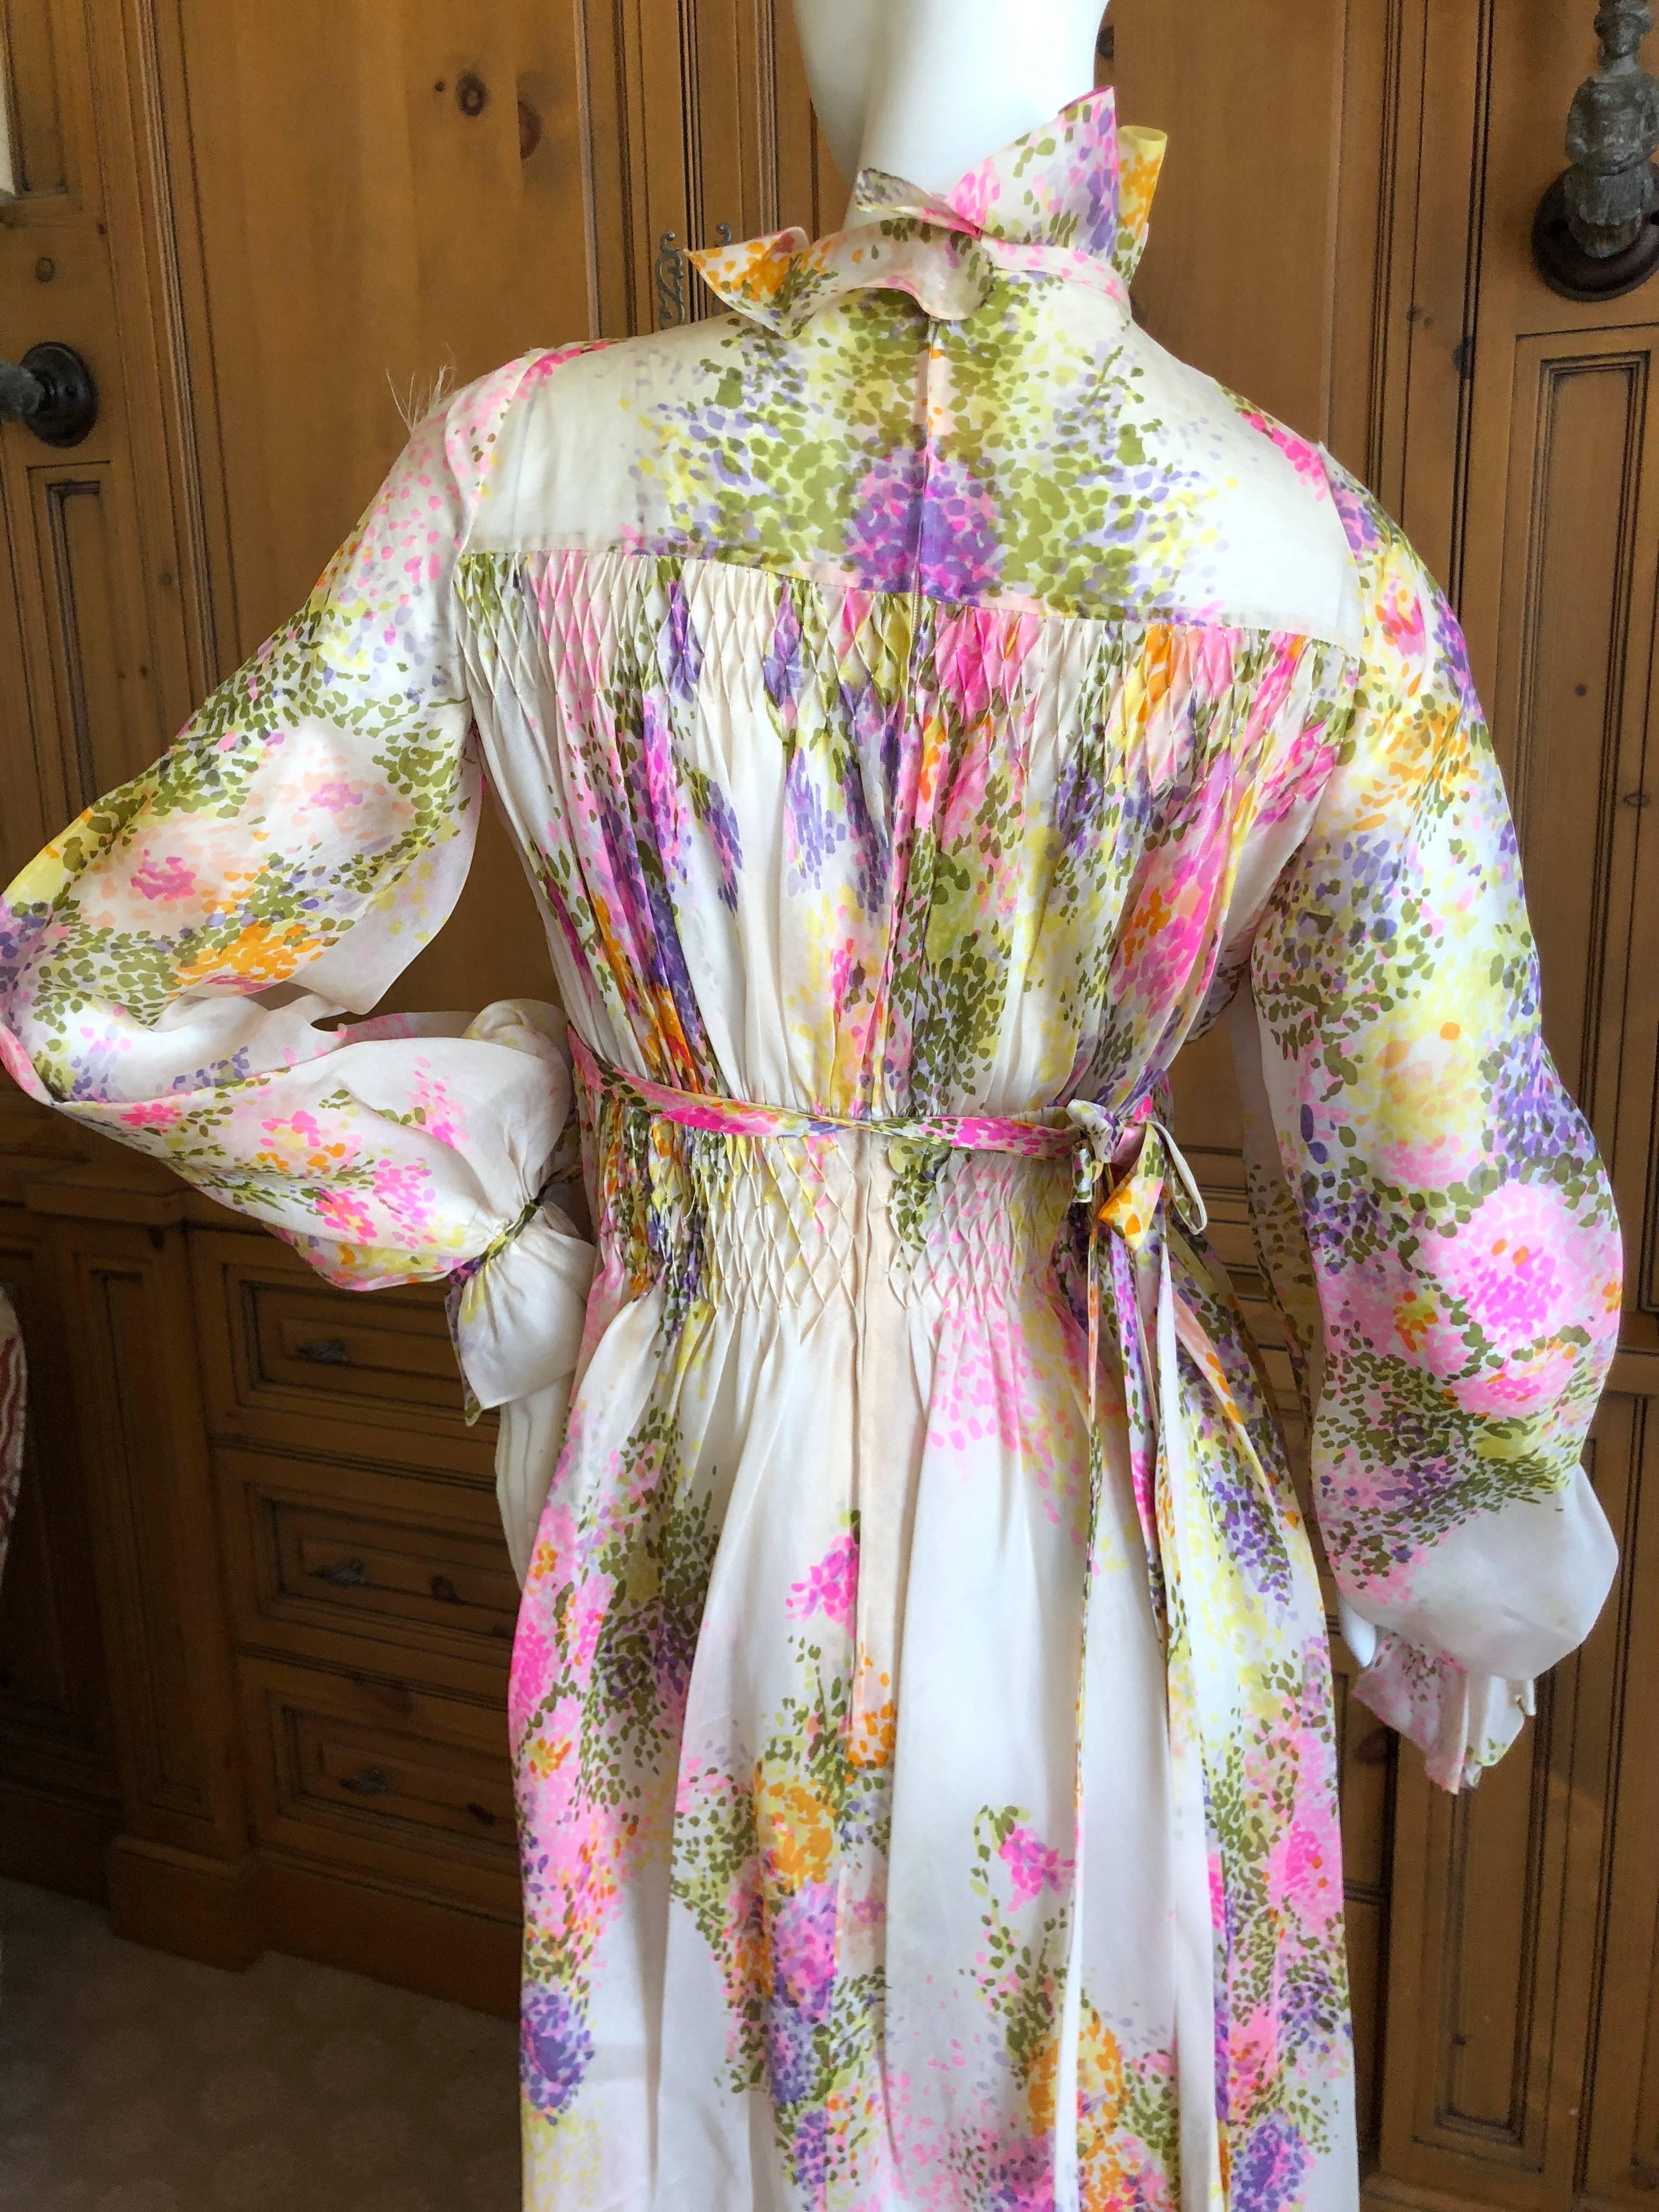 Cardinali Ruffle Silk Chiffon Floral Evening Dress with Pin Tuck Details, 1970s  For Sale 4